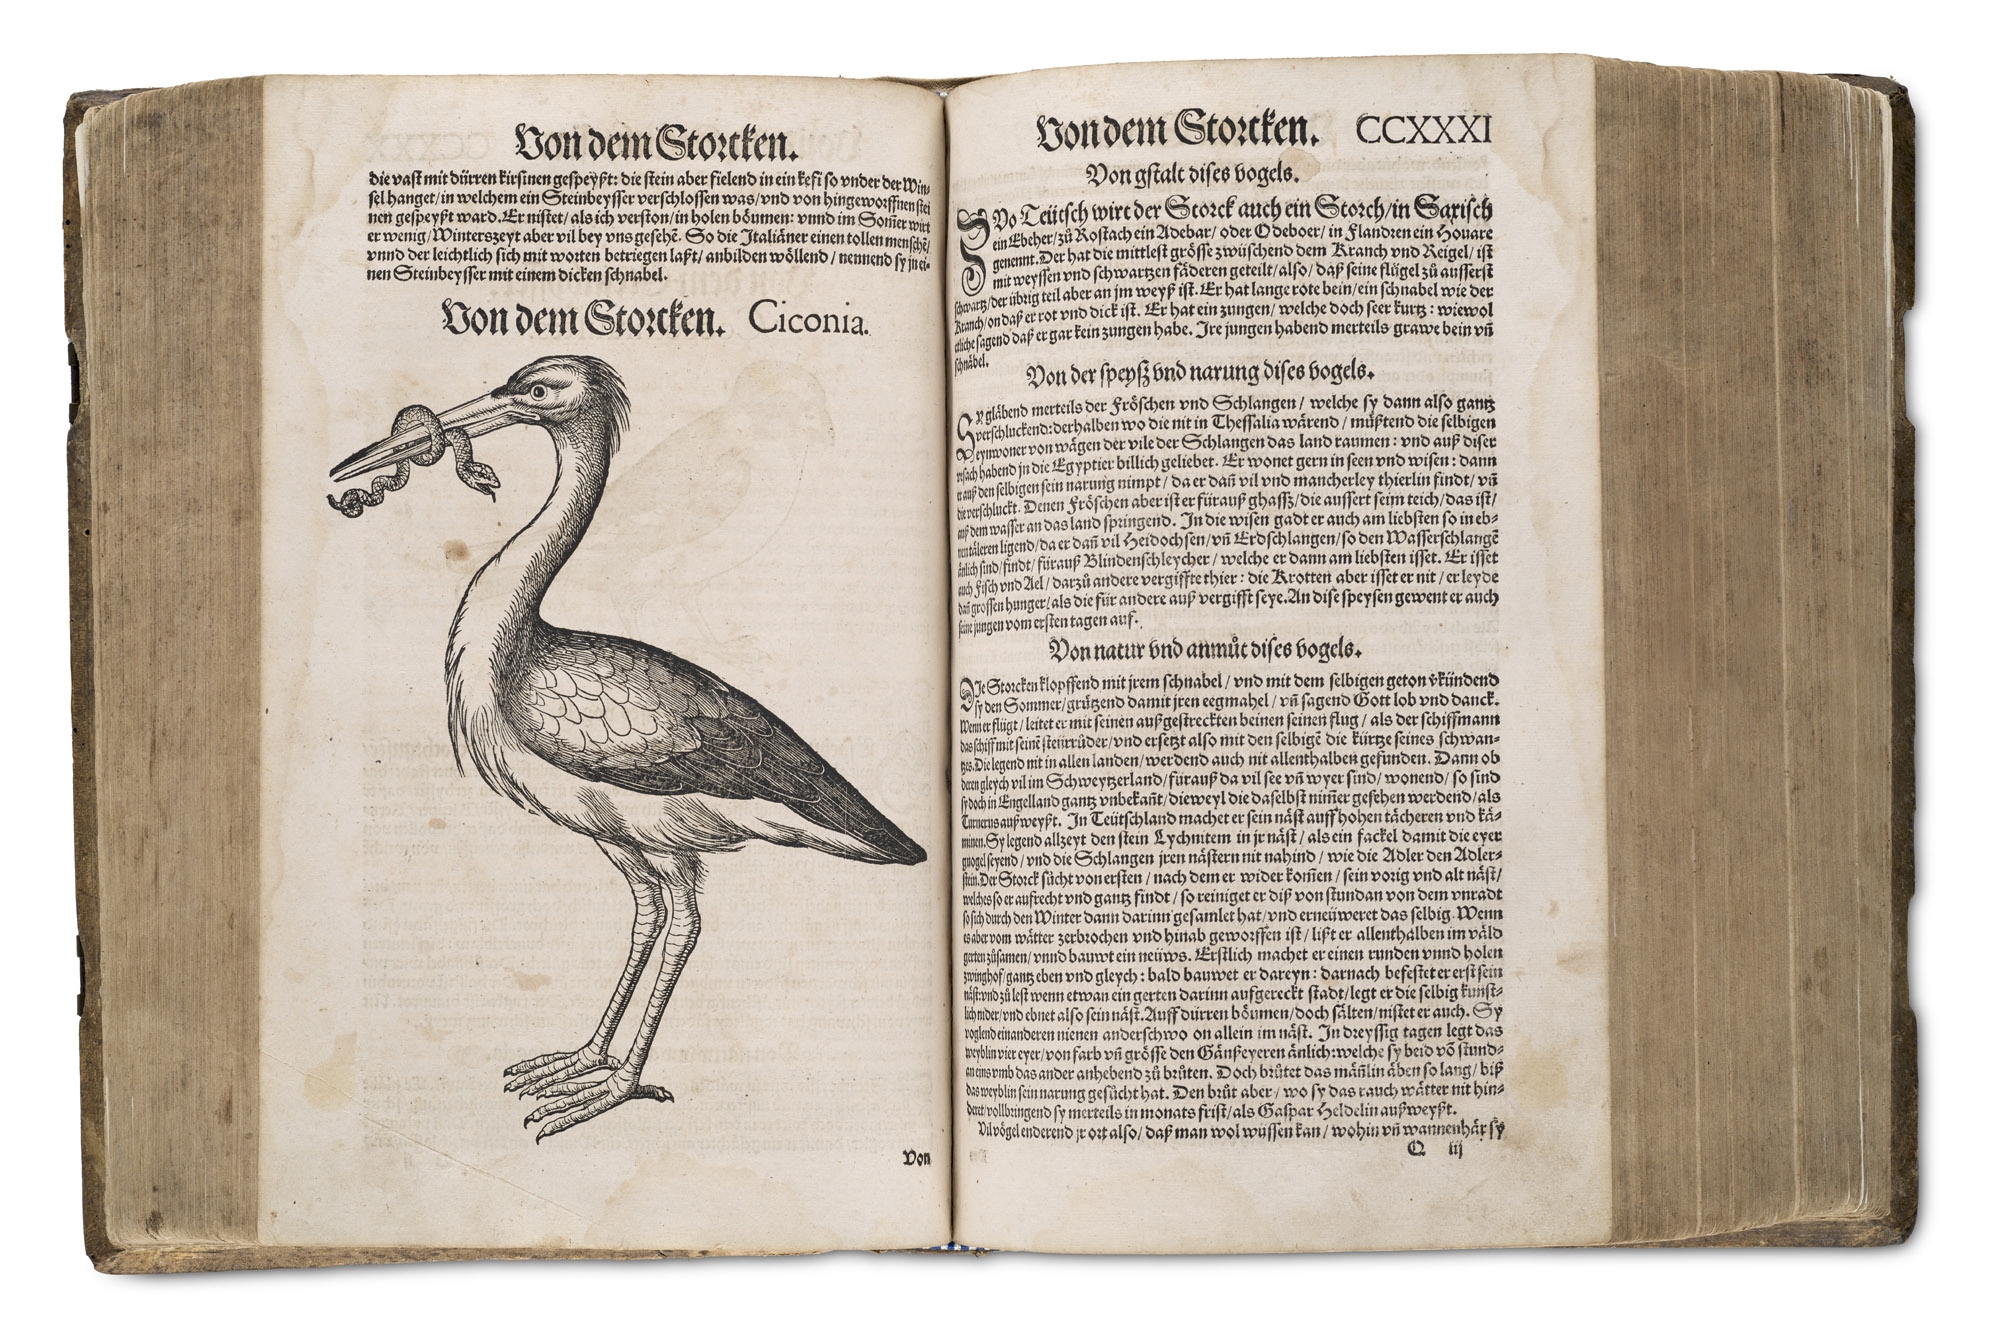 Artwork by Conrad Gesner, Vogelbuch, Made of woodcuts (3)